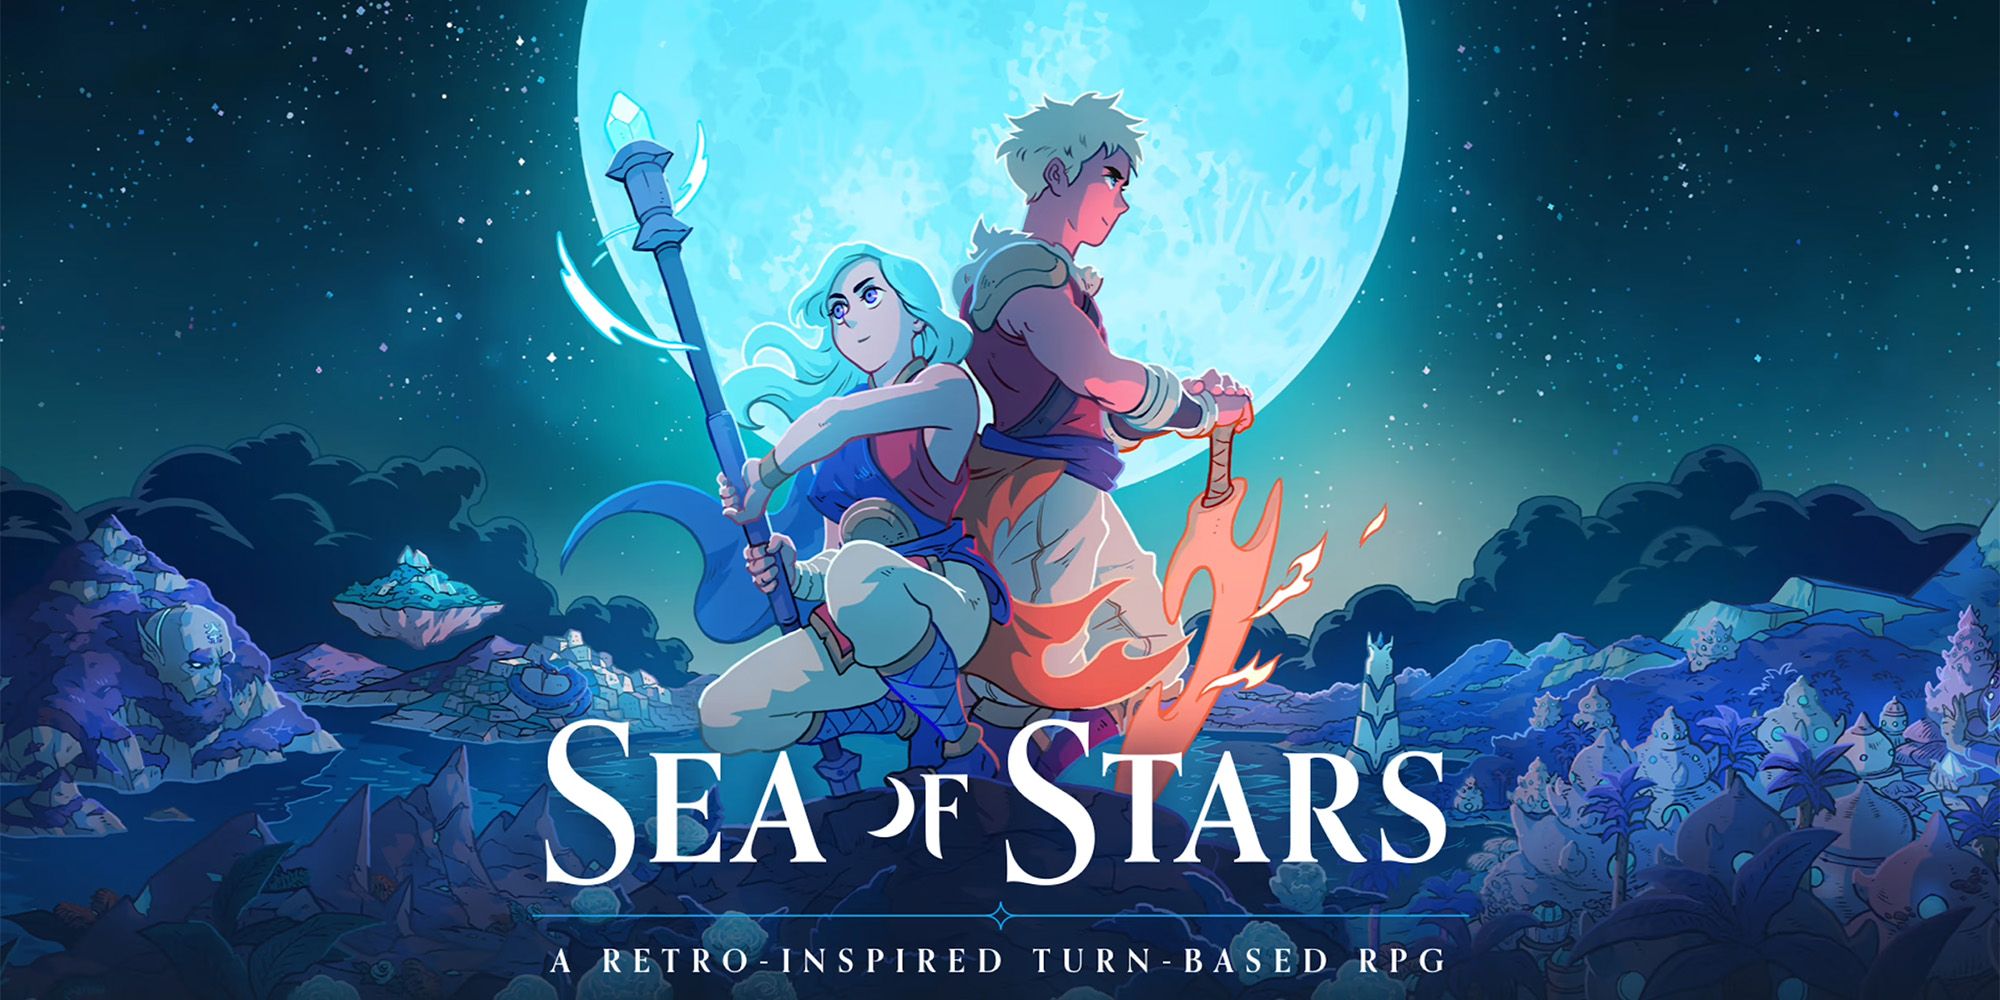 Sea Of Stars - Valere and Zale hold their weapons while standing in front of a full moon